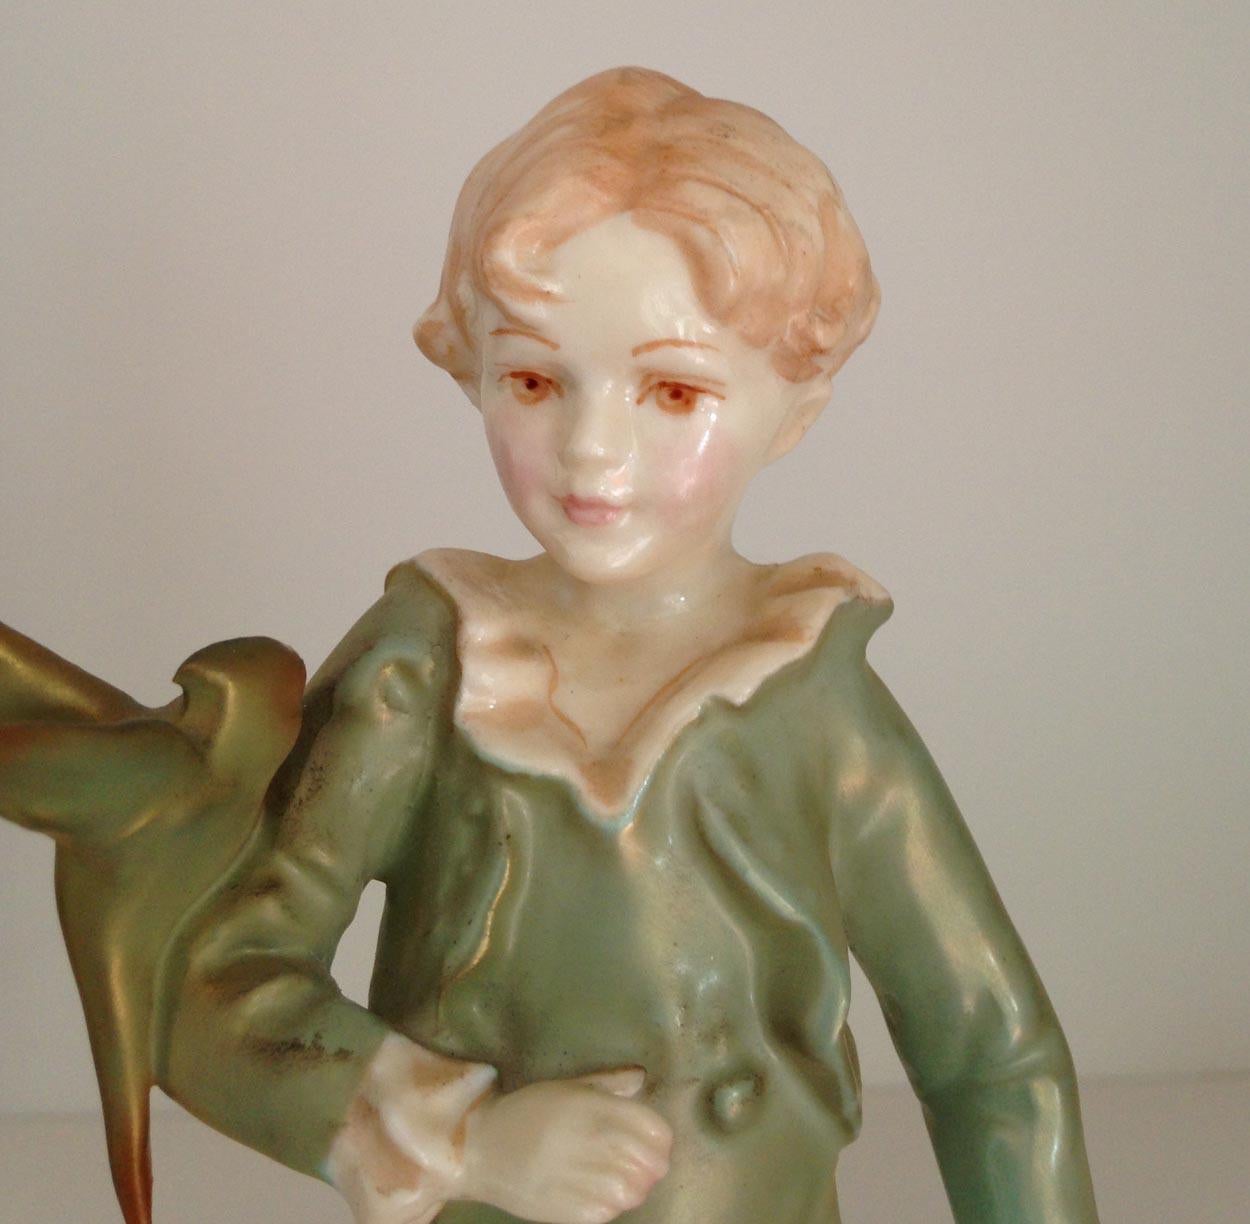 Royal Worcester figurine parakeet boy, made in England. The figurine depicts a young boy with a parakeet perched on his right arm. The boy is dressed in a green jacket and breeches and shoes with buckles.

This design was modeled by the Royal